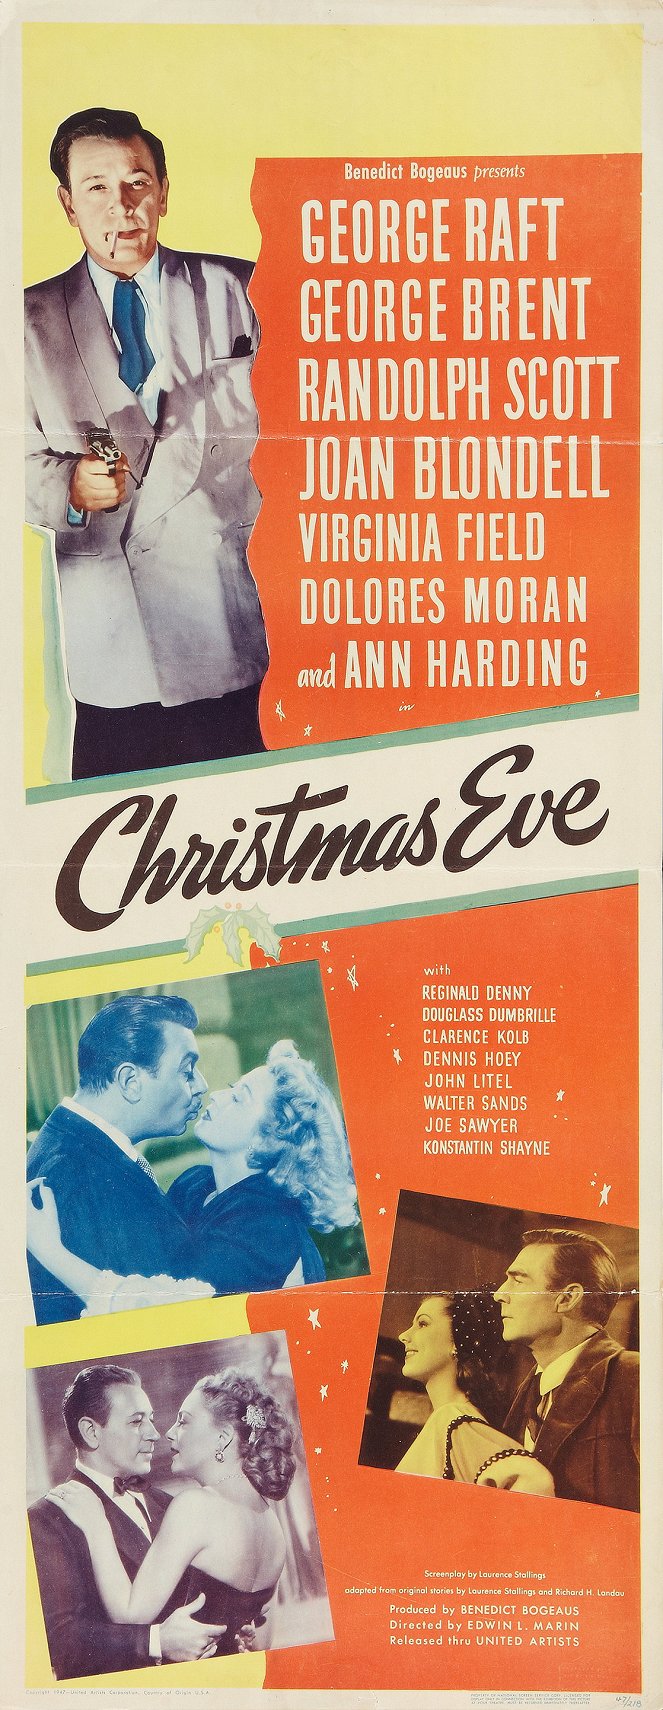 Christmas Eve - Posters